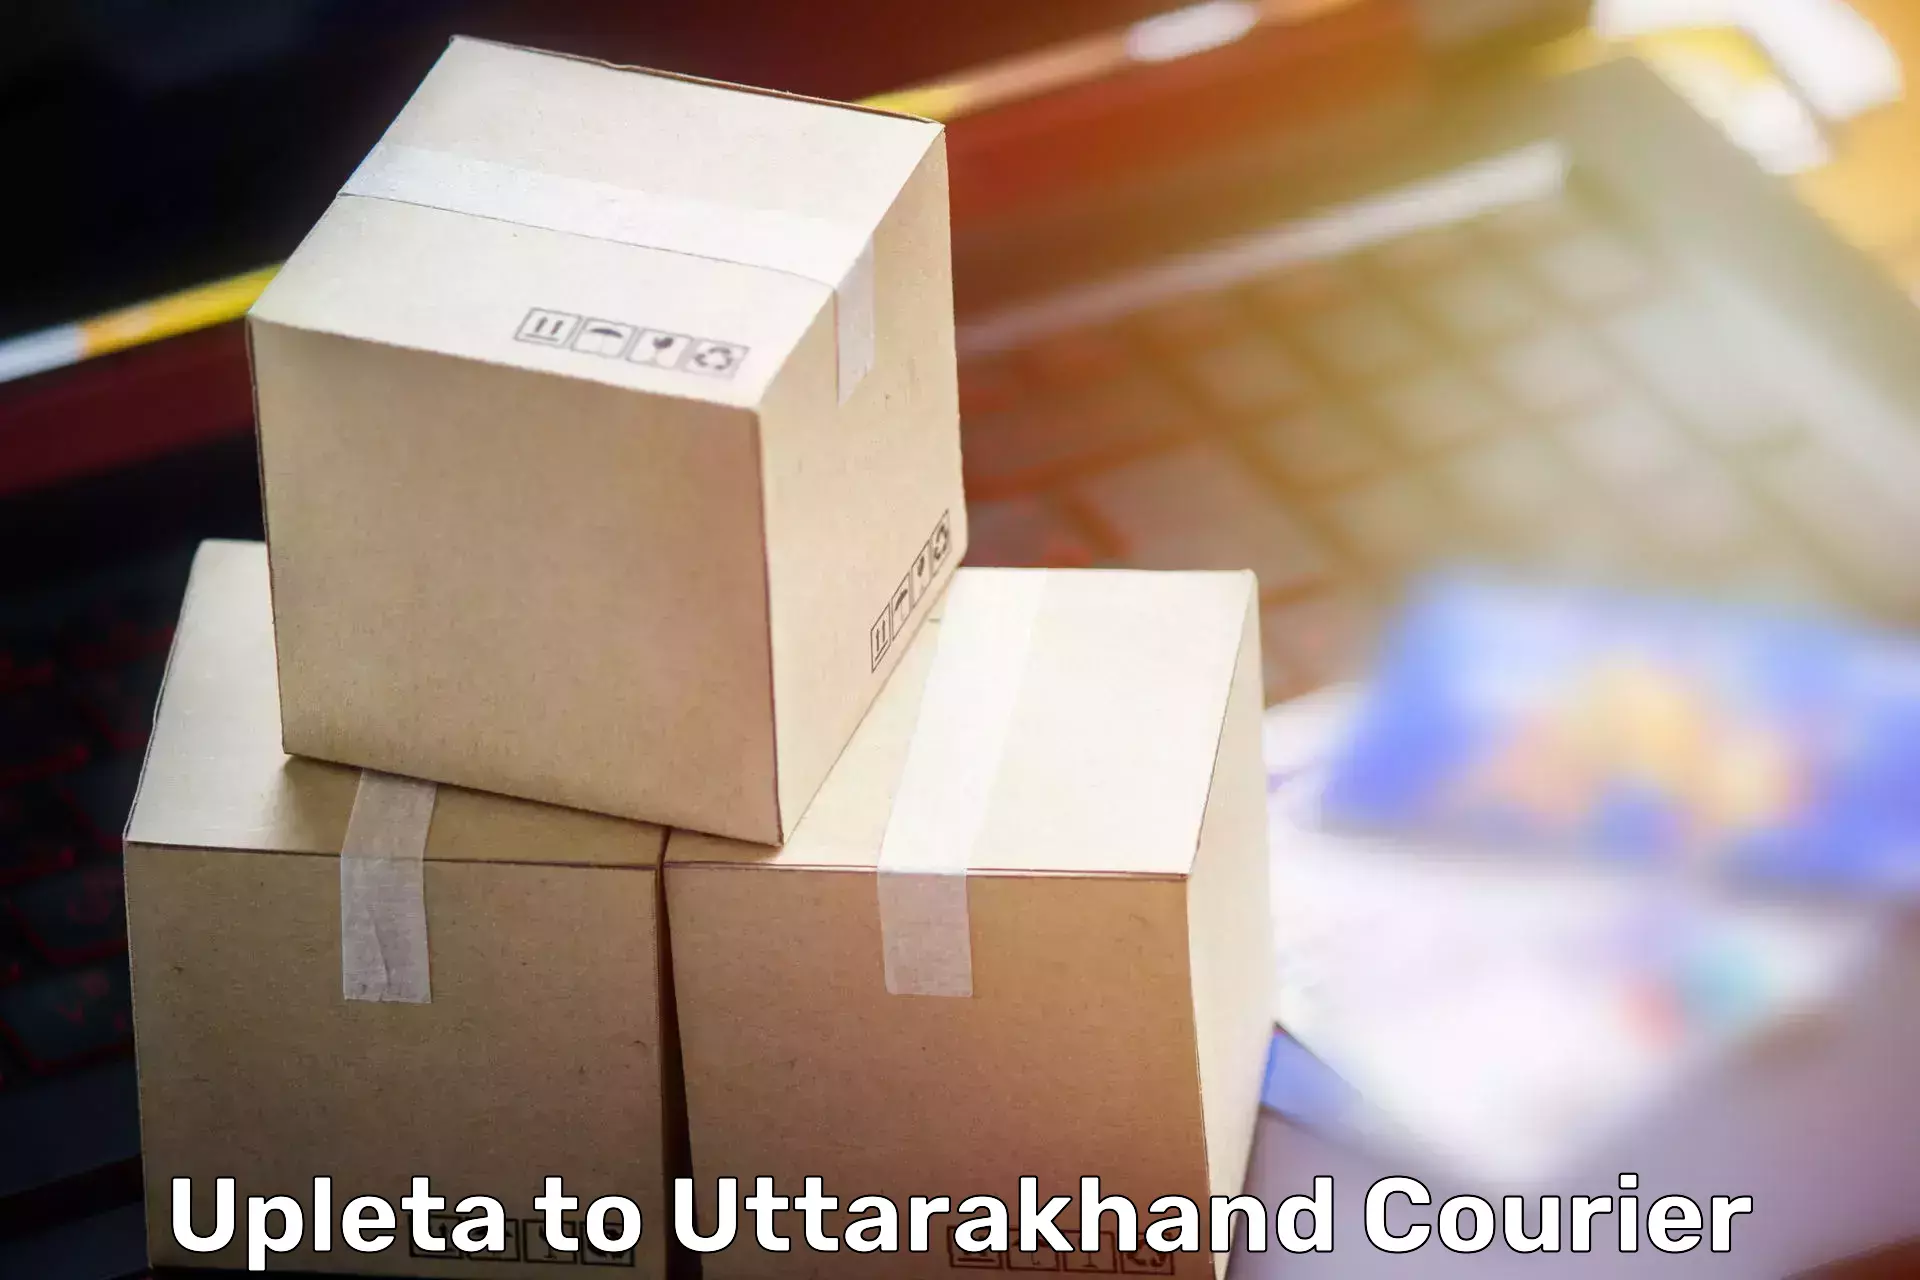 Moving and handling services Upleta to Haridwar